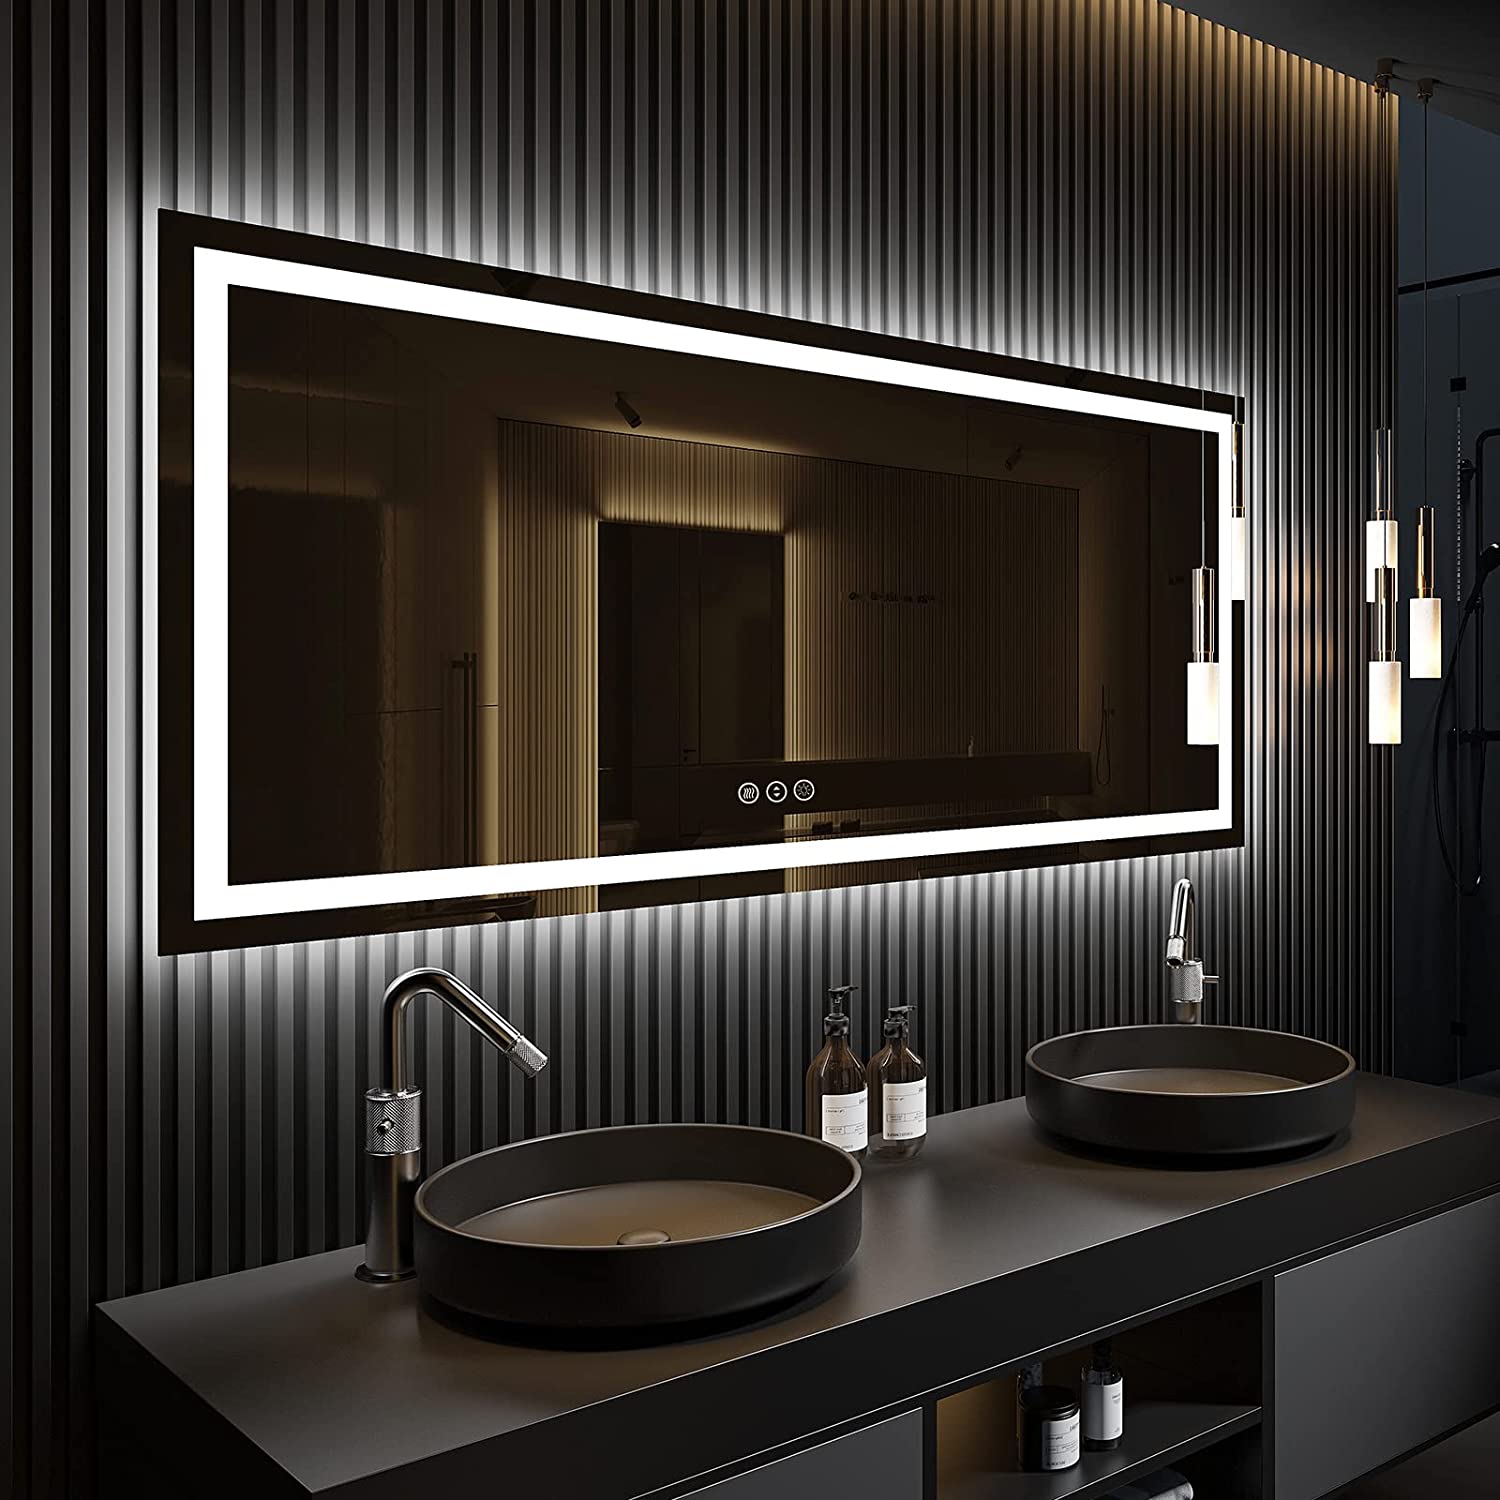 MIRROTREND LED Bathroom Mirror with Lights  Framless Rectangle Mirror Dimmable Front Lights + Backlit Anti-Fog